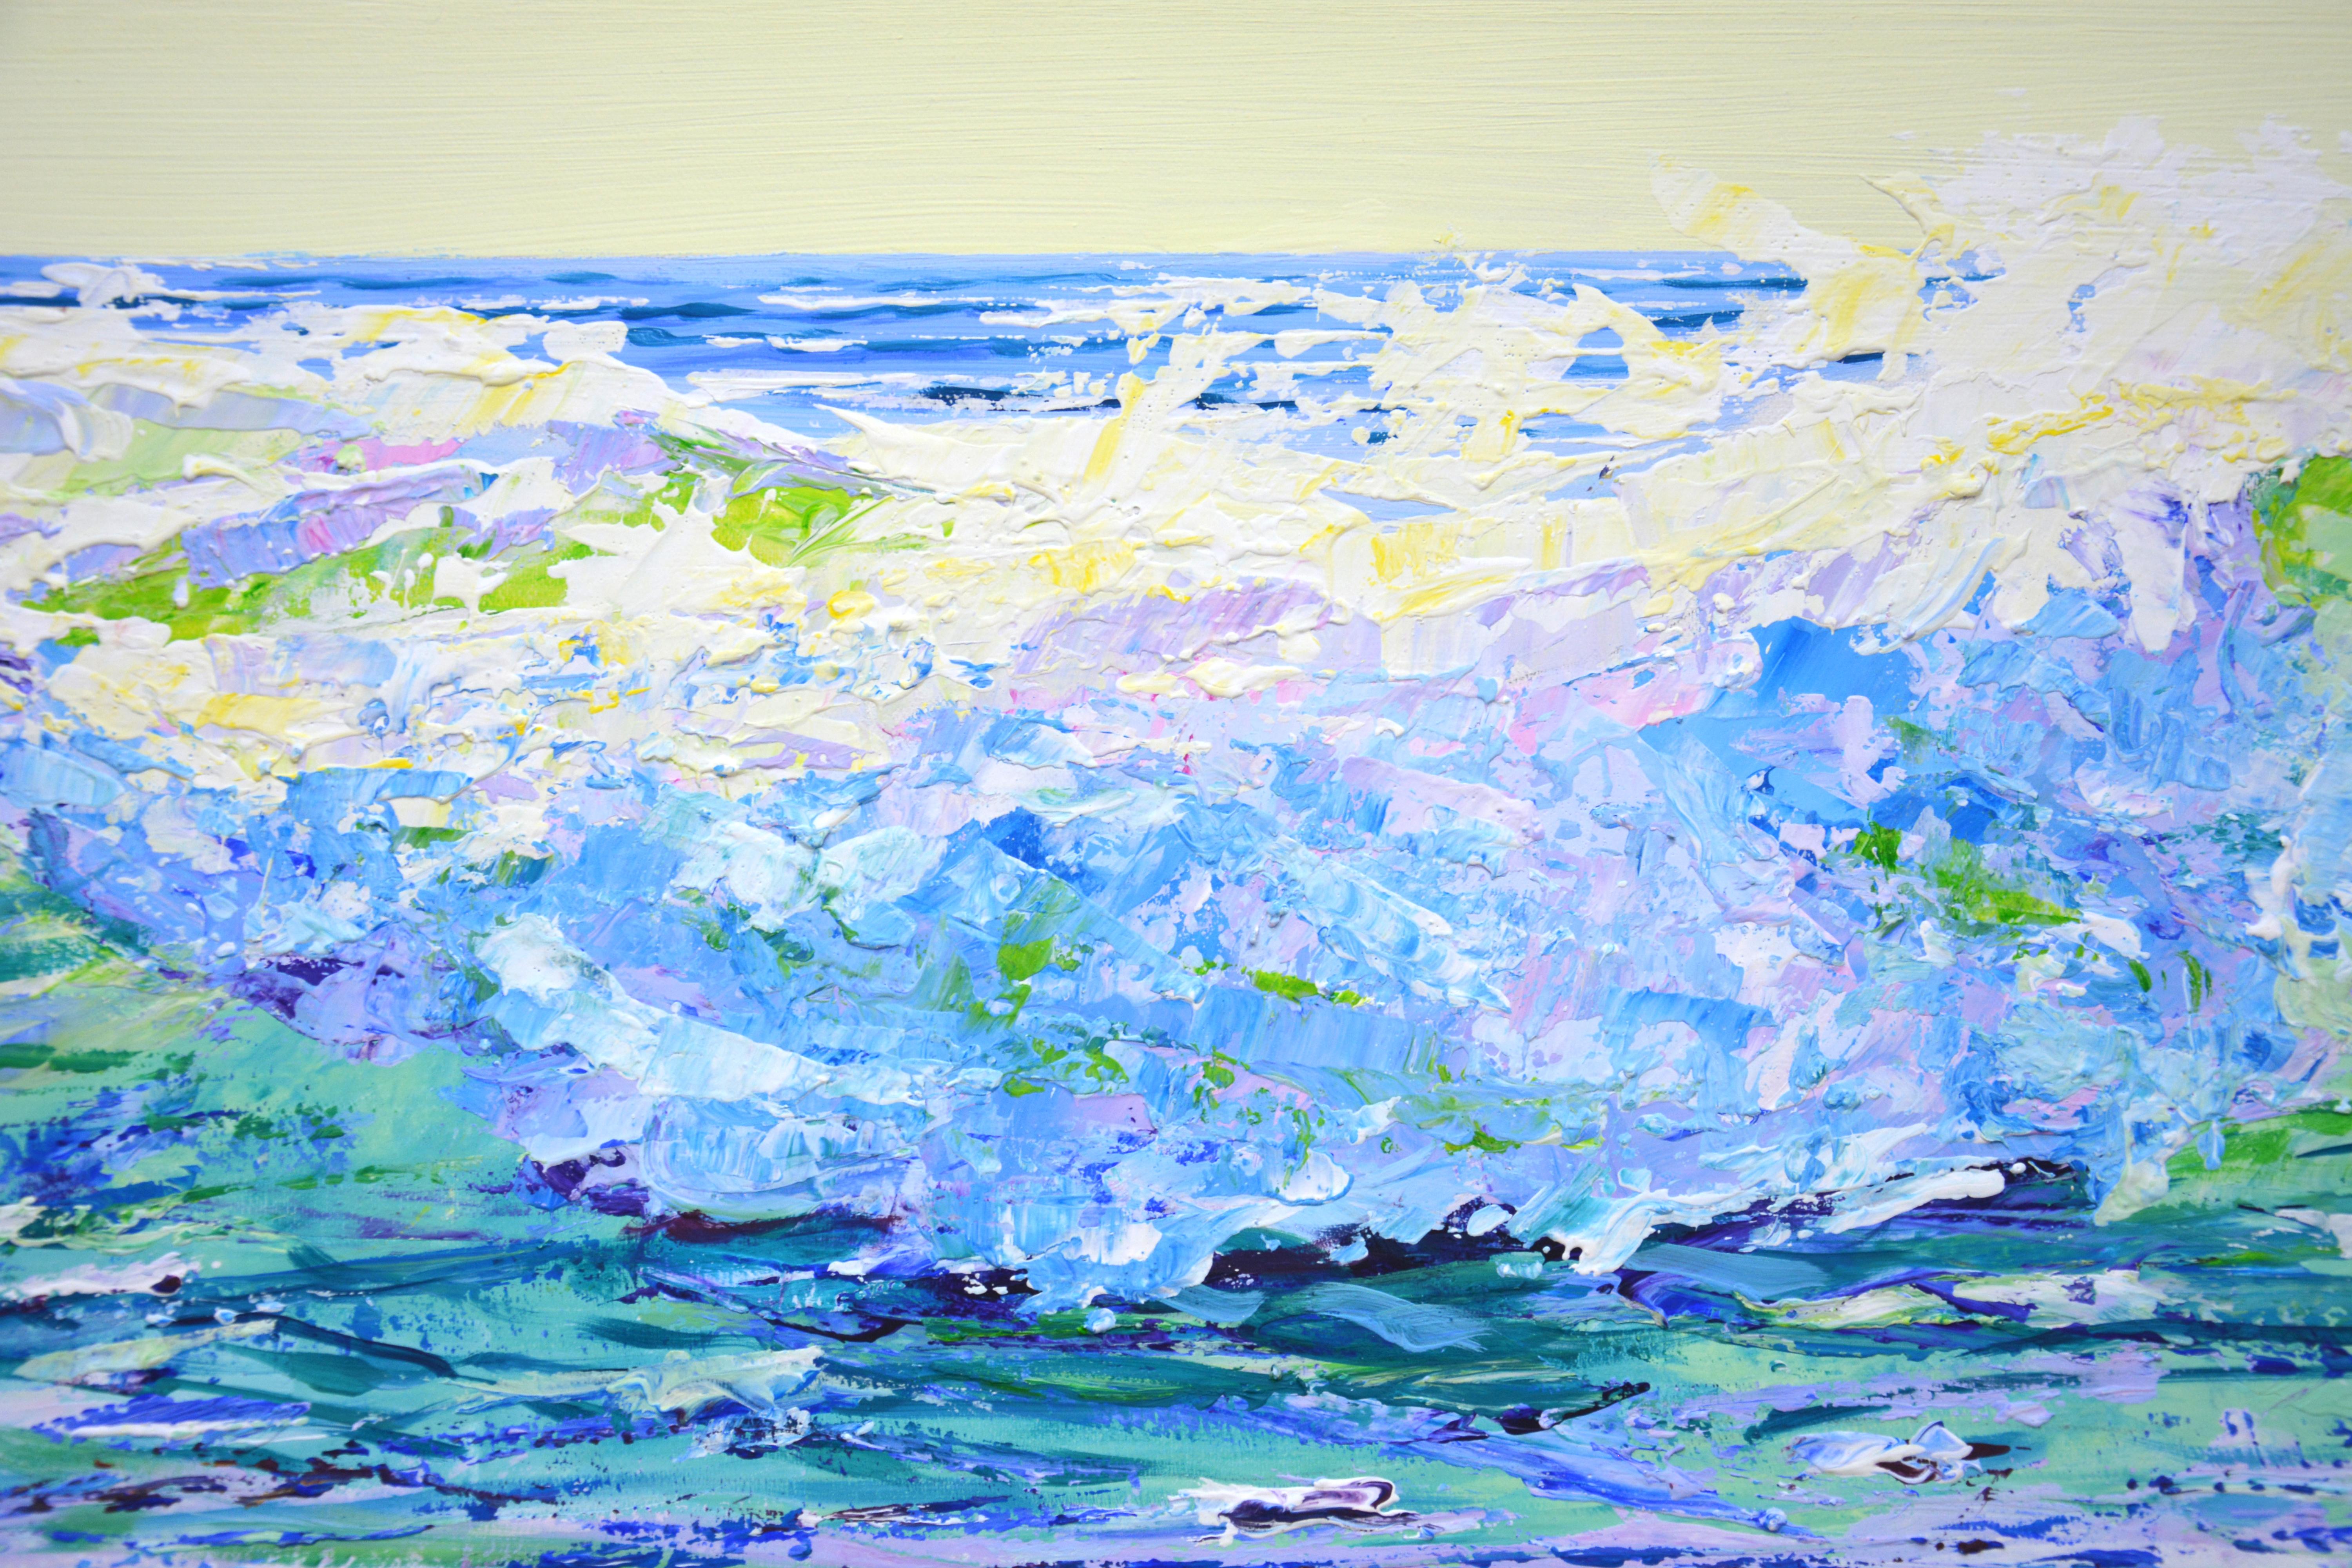 Ocean waves 3. The work is written with inspiration, positively. Nature: seascape, clear sky over the ocean, light reflected by incoming waves, sun glare on the water, sea foam create an atmosphere of relaxation. A rich palette of blue, turquoise,